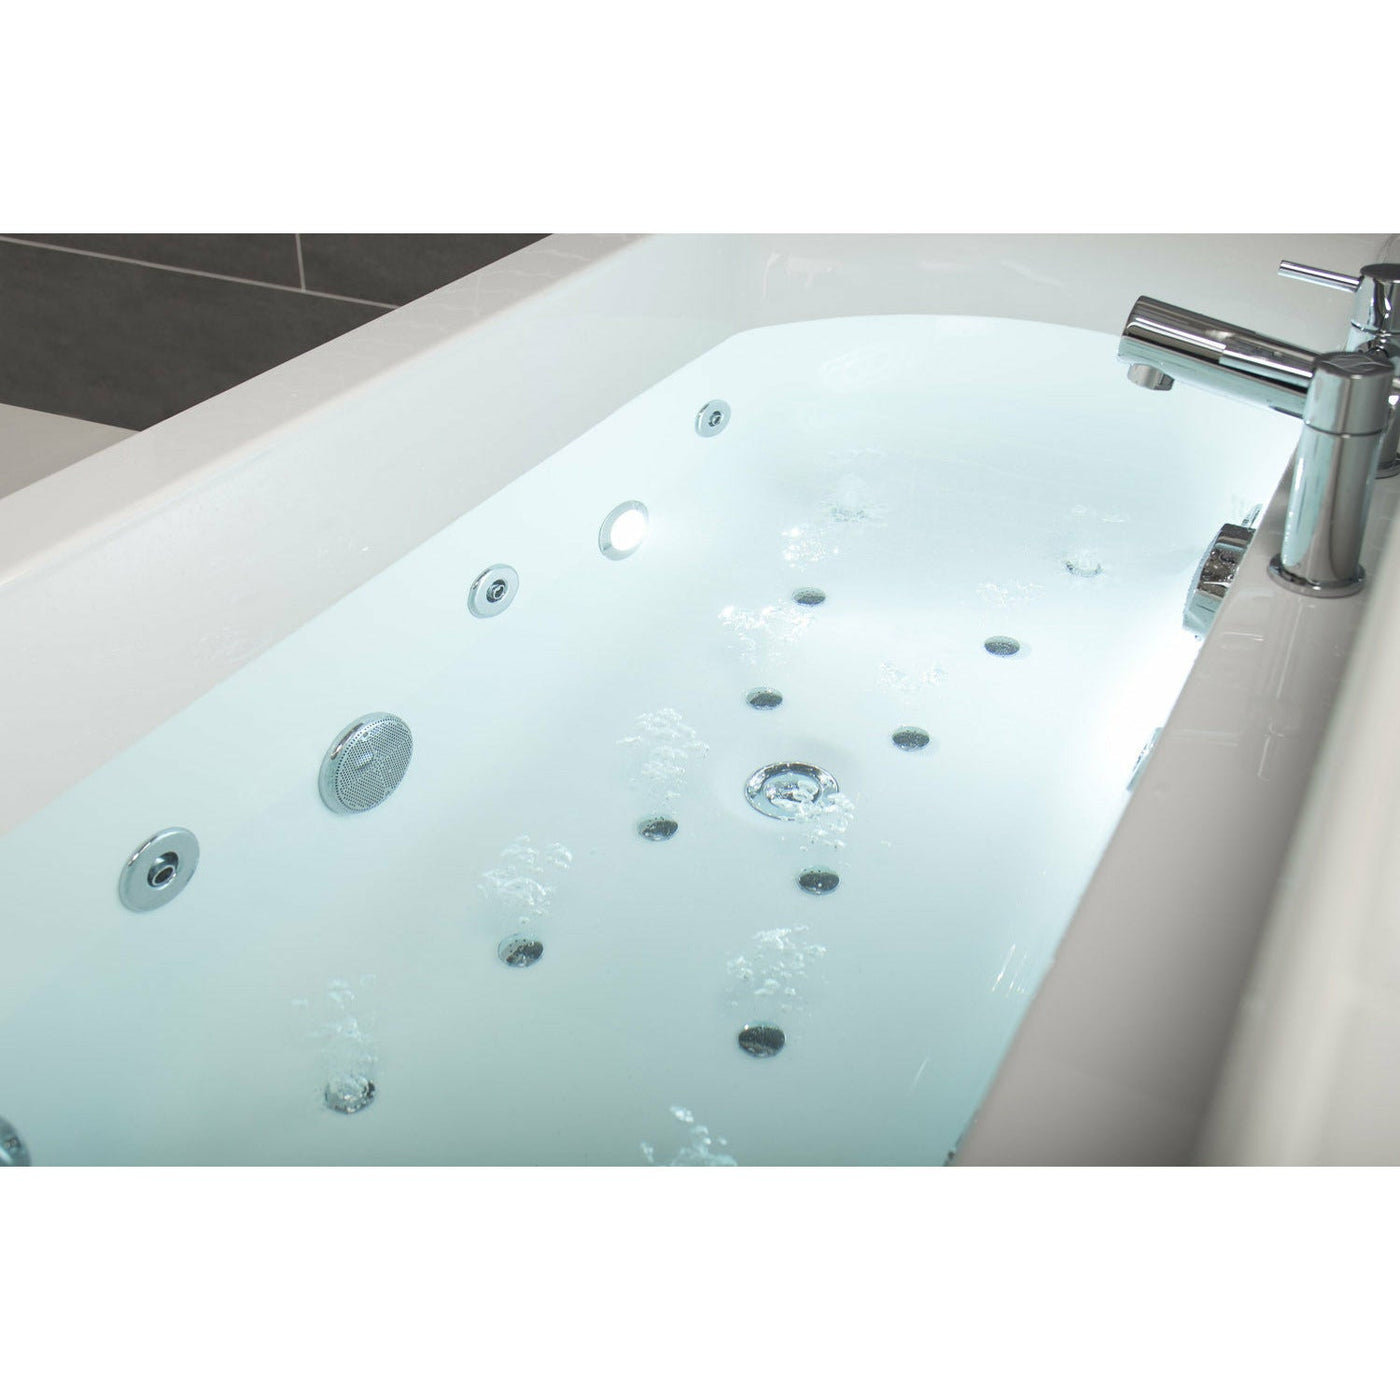 Frontline Polished Chrome Deluxe Whirlpool Jet System - Letta London - 